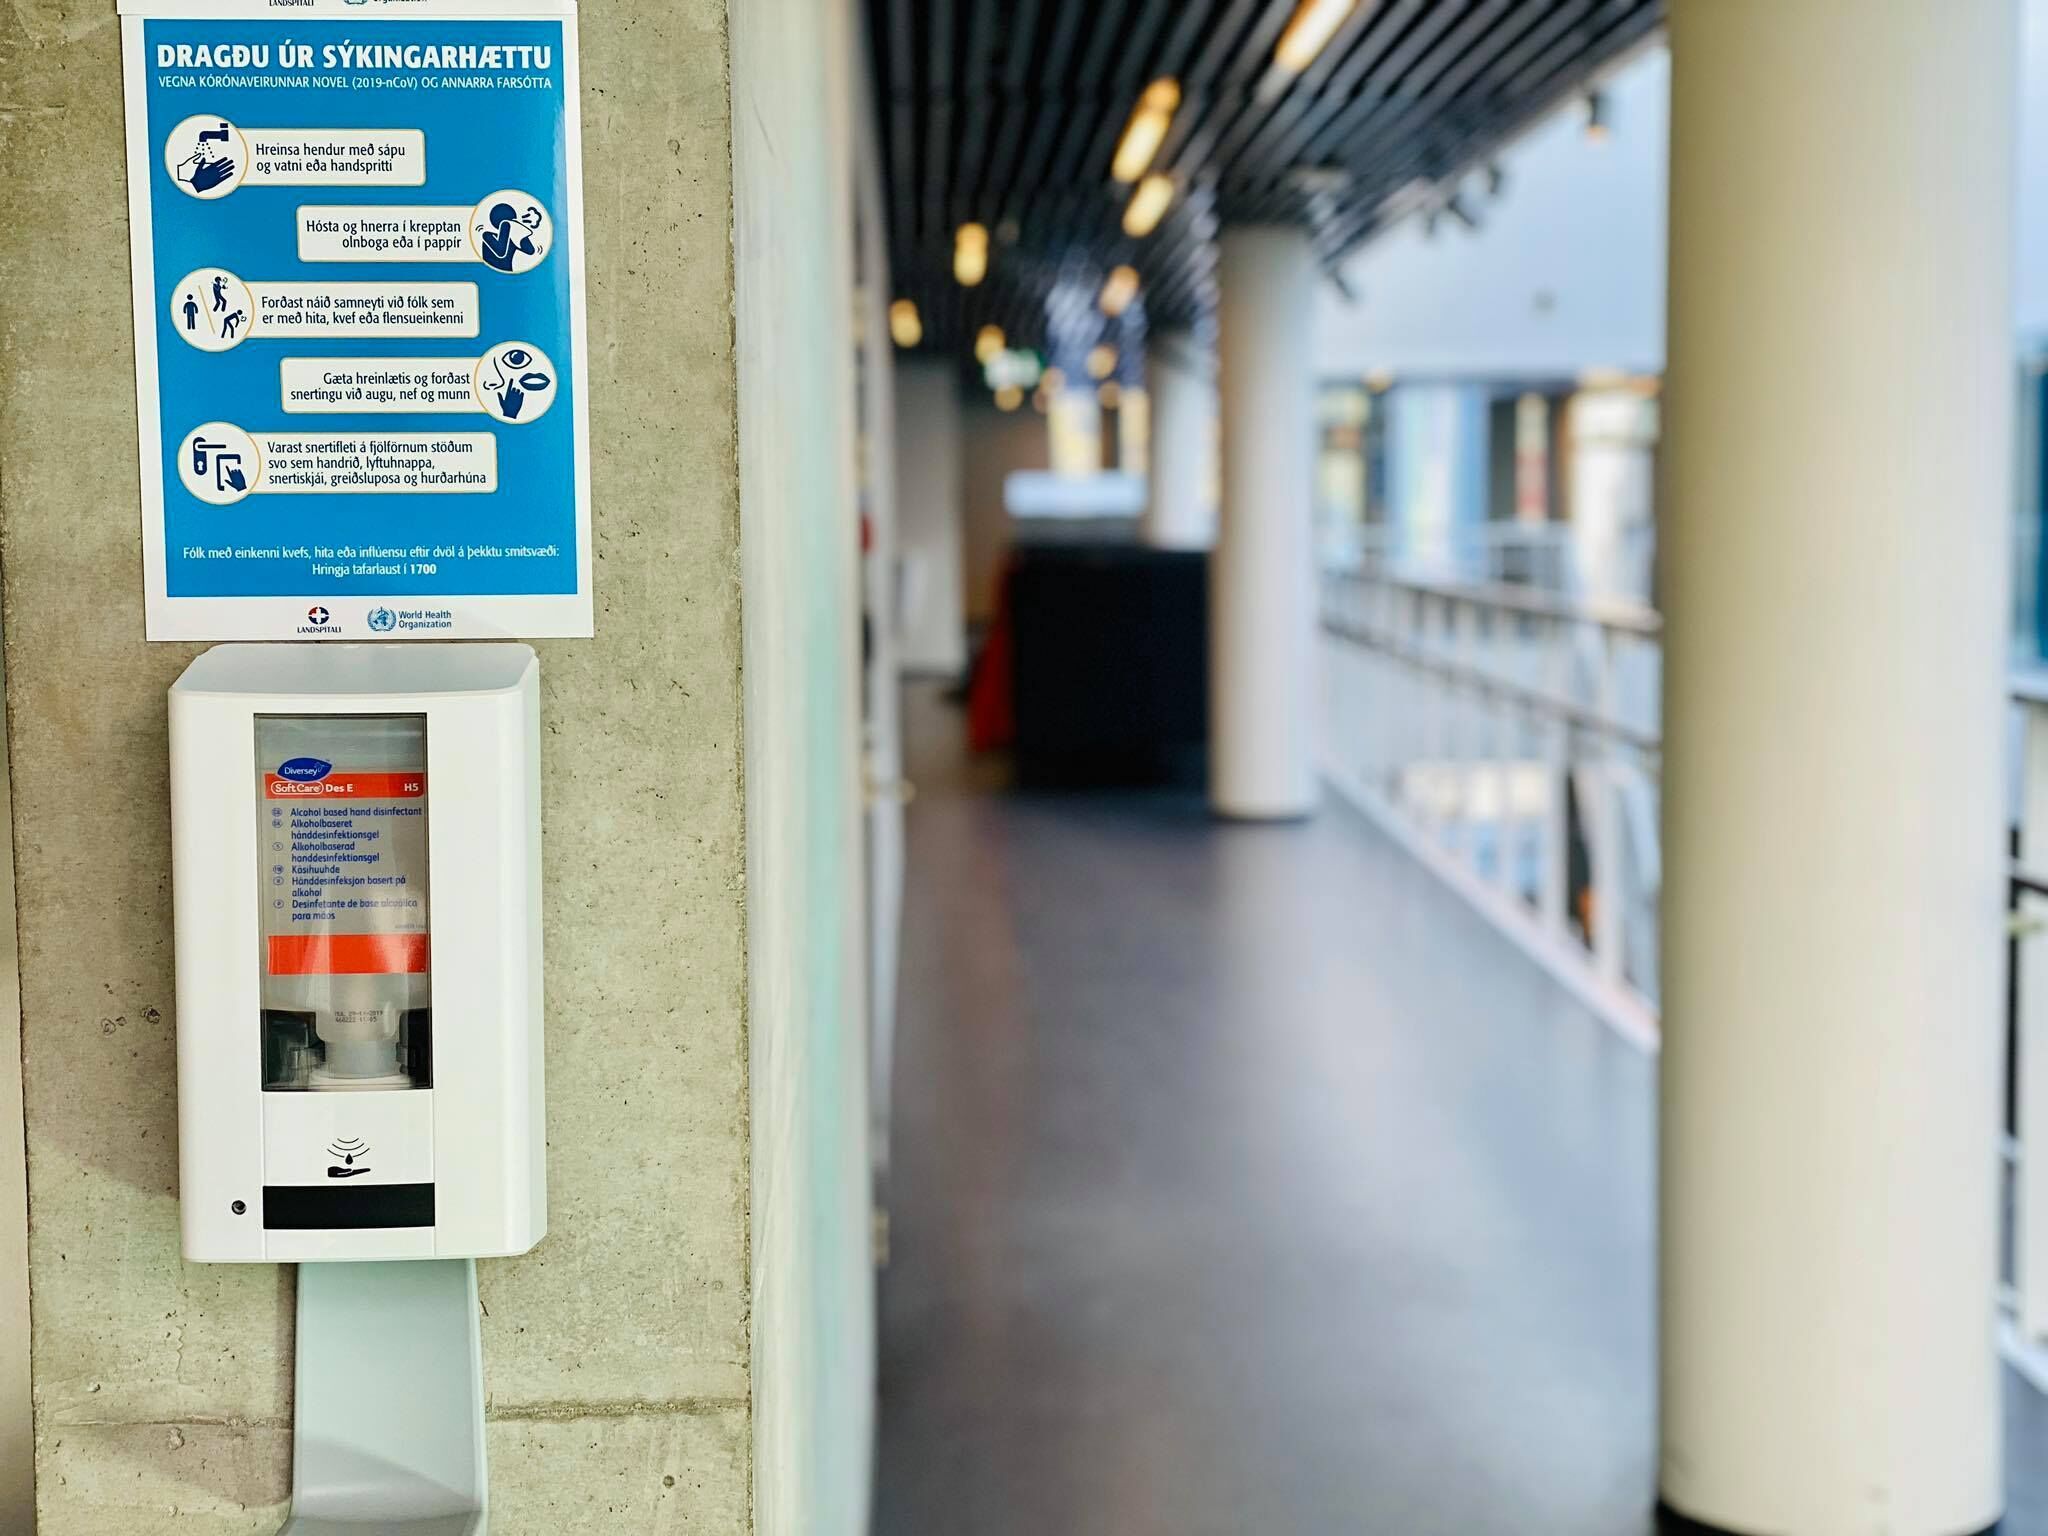 Disinfectant alcohol is to be found in all RU restrooms and near elevators. Posters from the Landspitali University Hospital with tips on how to avoid infection have been placed throughout the RU building.